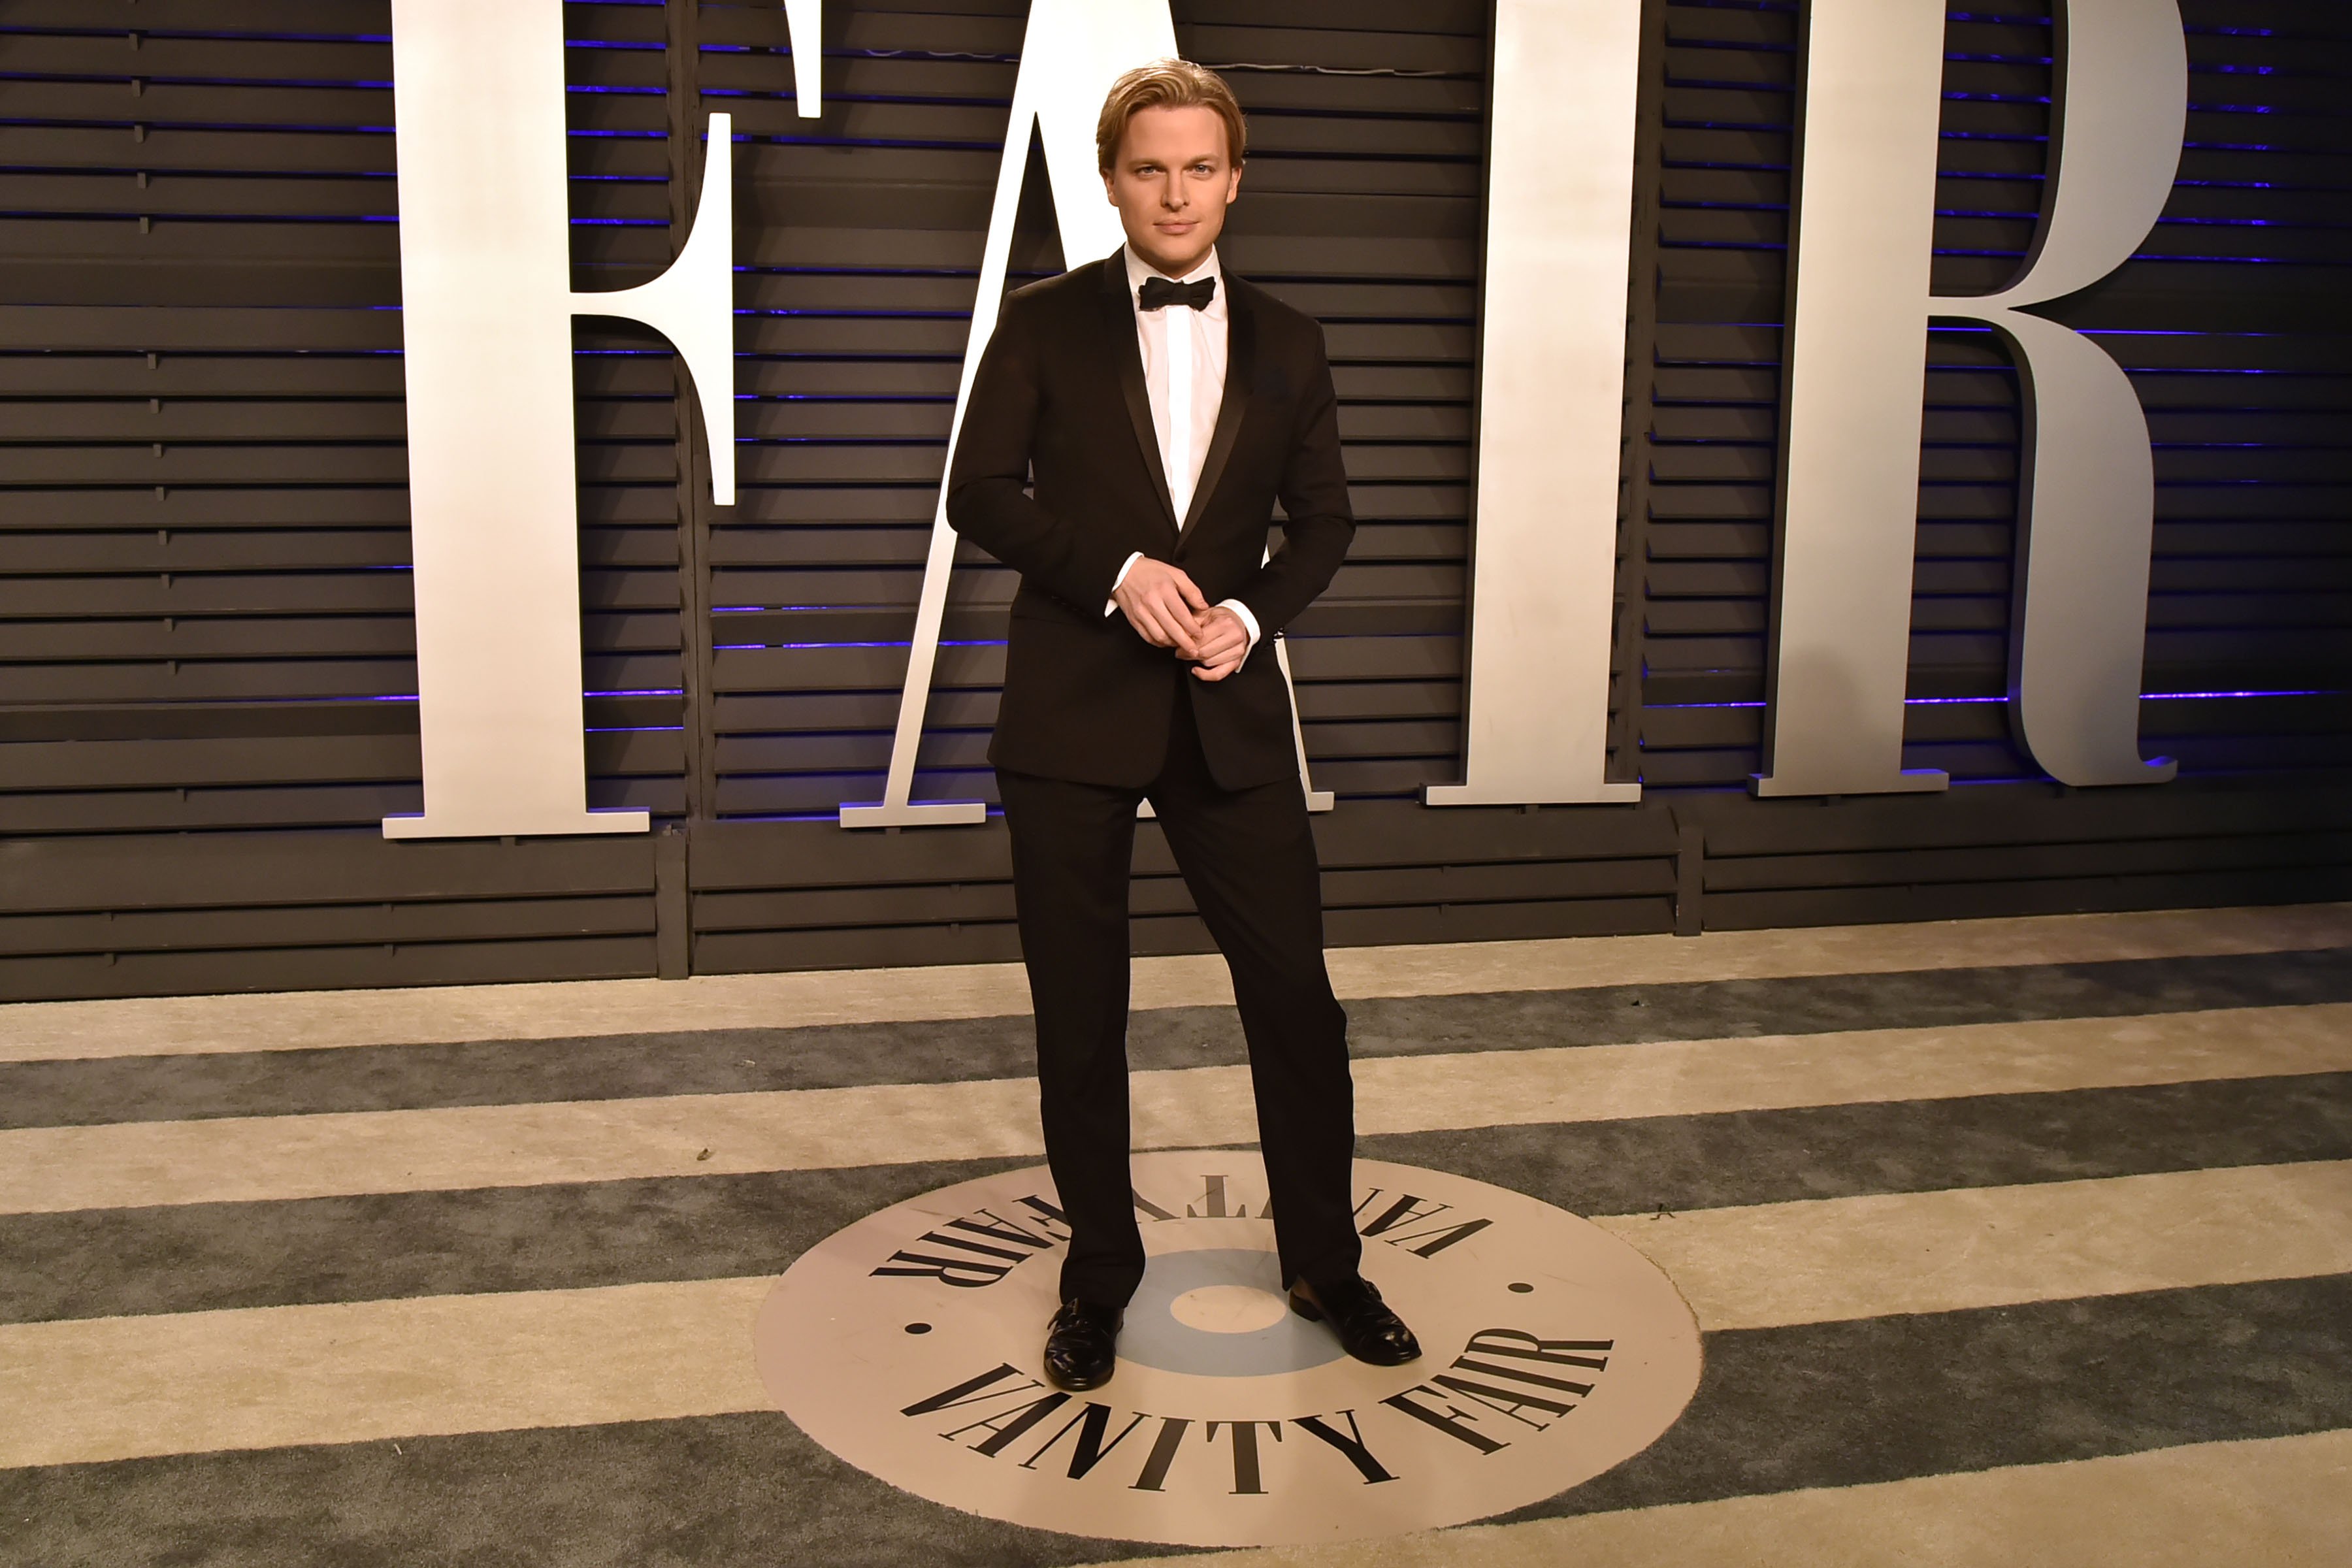 Ronan Farrow attends the 2019 Vanity Fair Oscar Party at Wallis Annenberg Center for the Performing Arts